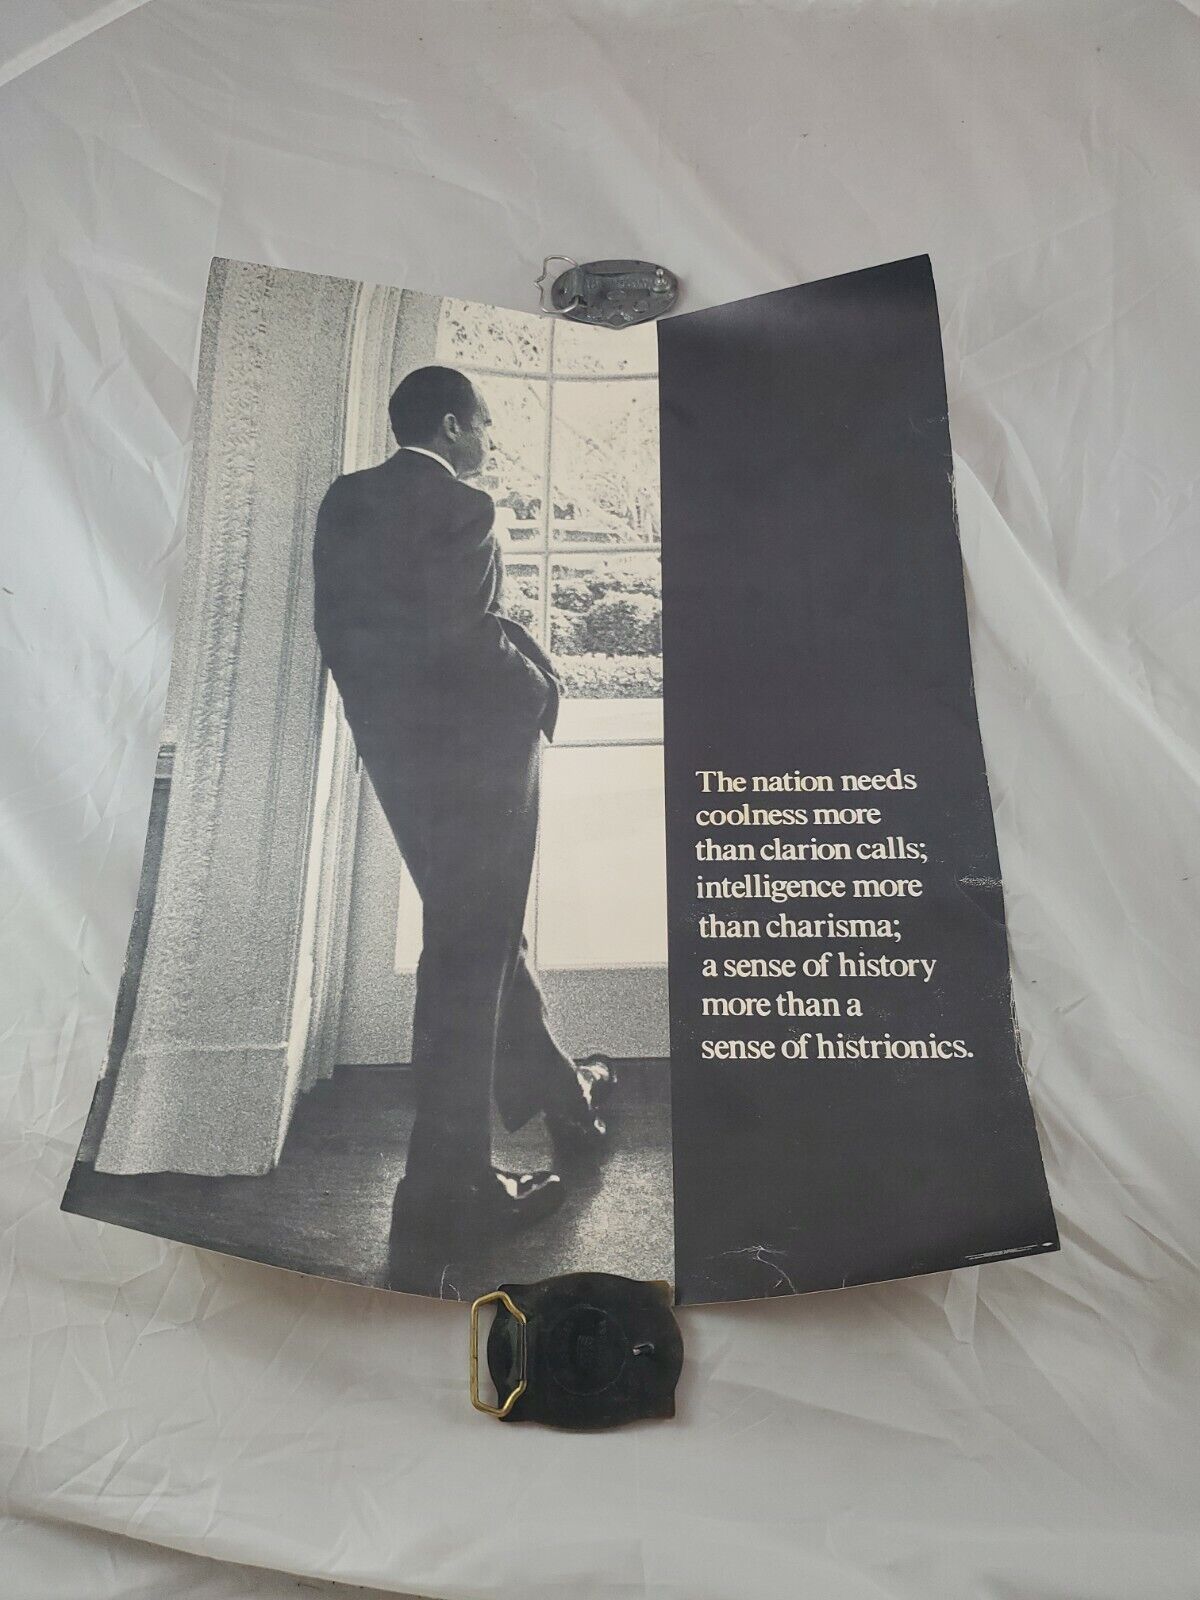 Richard Nixon Classic Coolness Campaign Poster (USA 1972) Political Poster 22x17